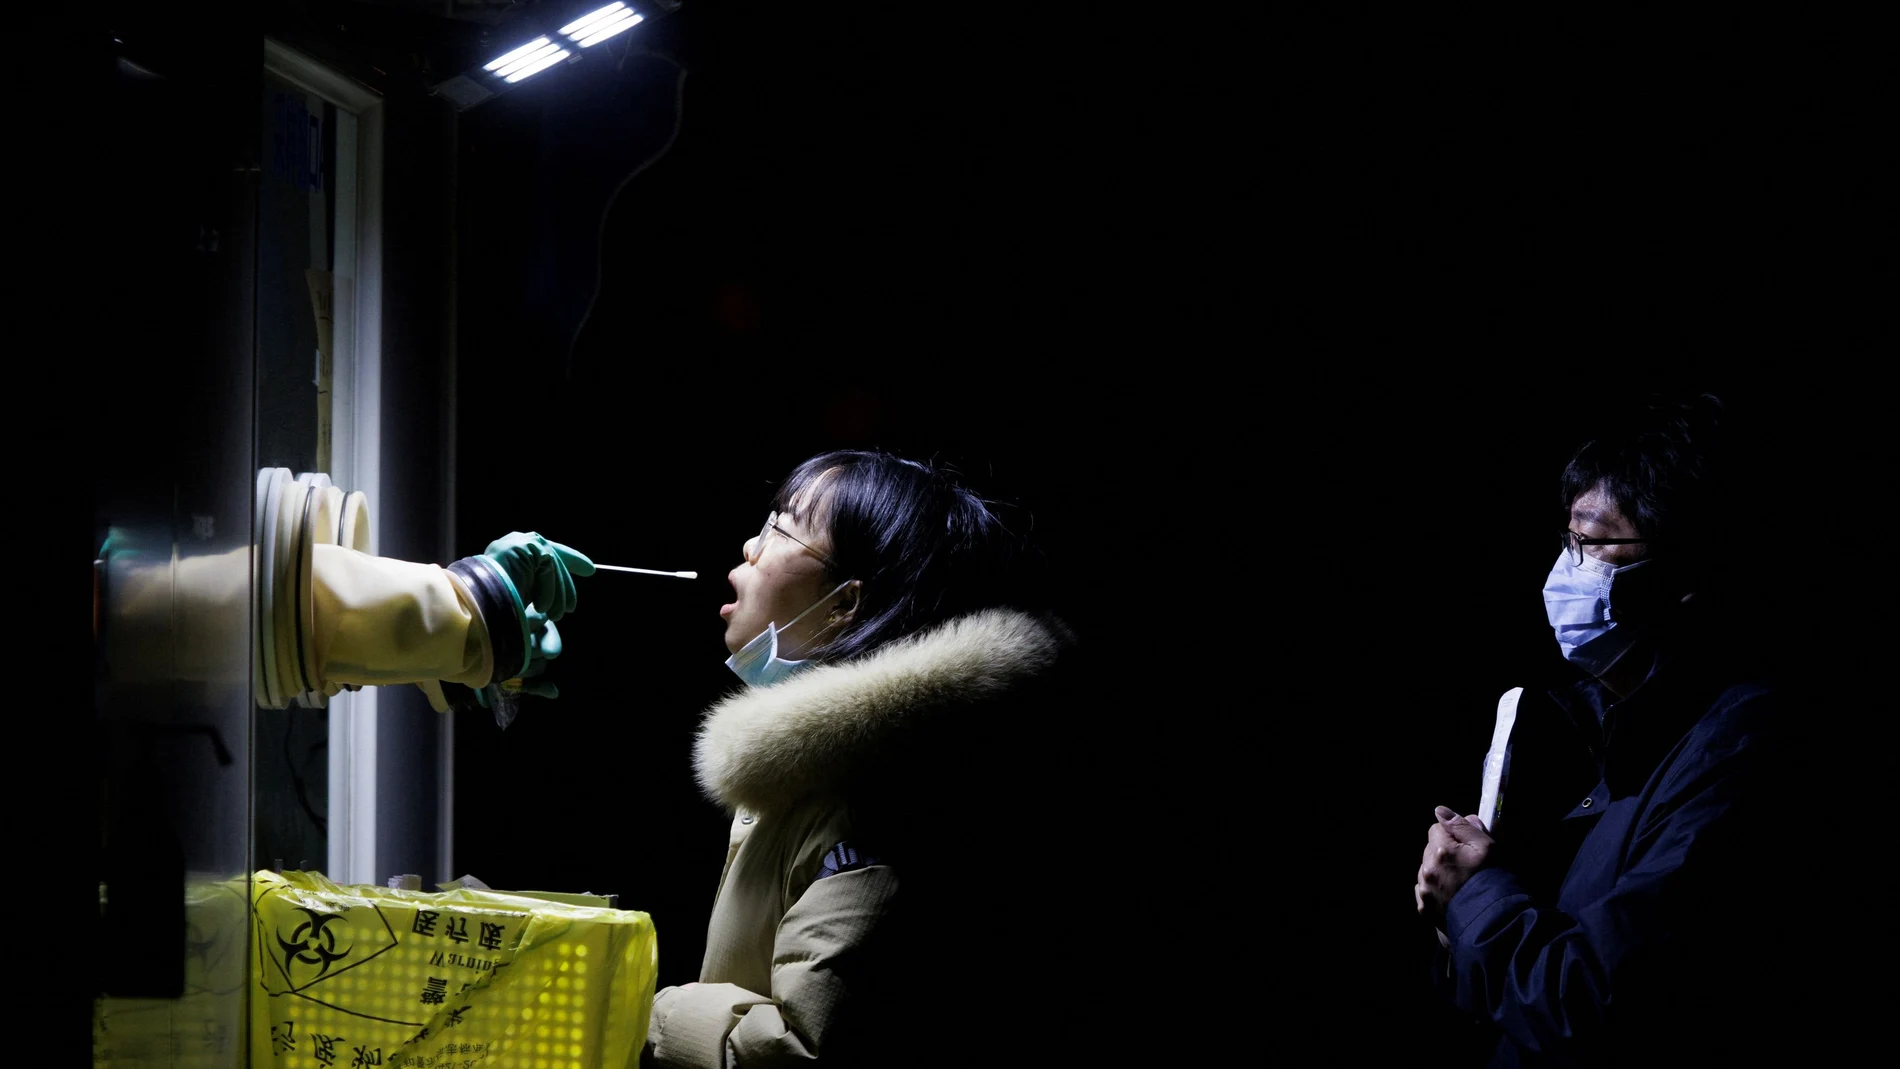 A woman receives a throat swab test at a street booth as the coronavirus disease (COVID-19) pandemic continues in Beijing, China, January 17, 2022. REUTERS/Thomas Peter